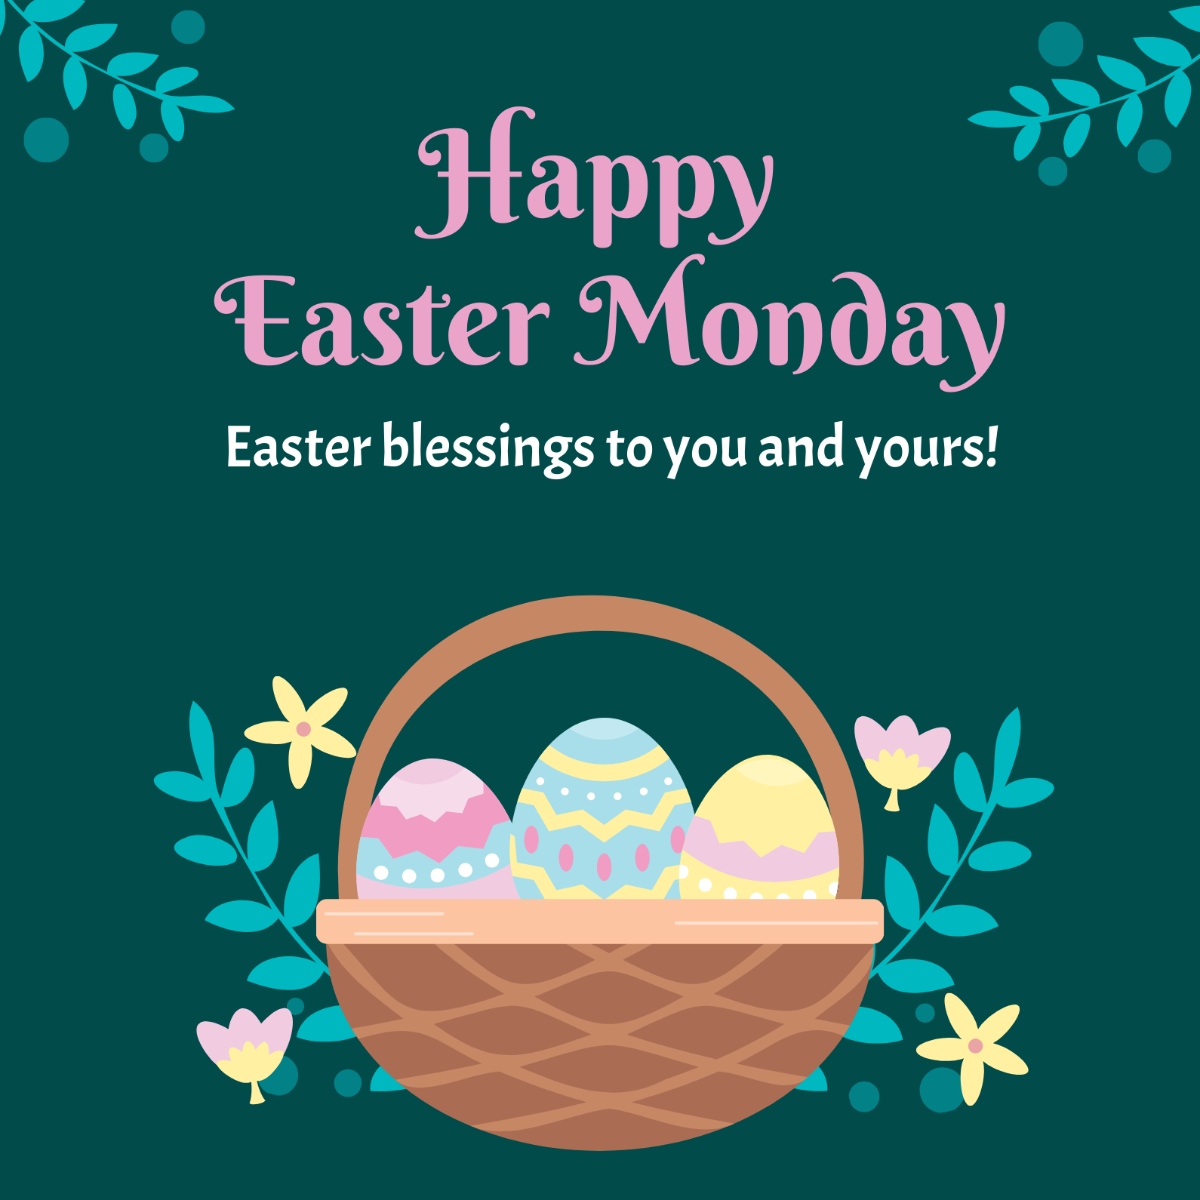 Free Easter Monday LinkedIn Post Template